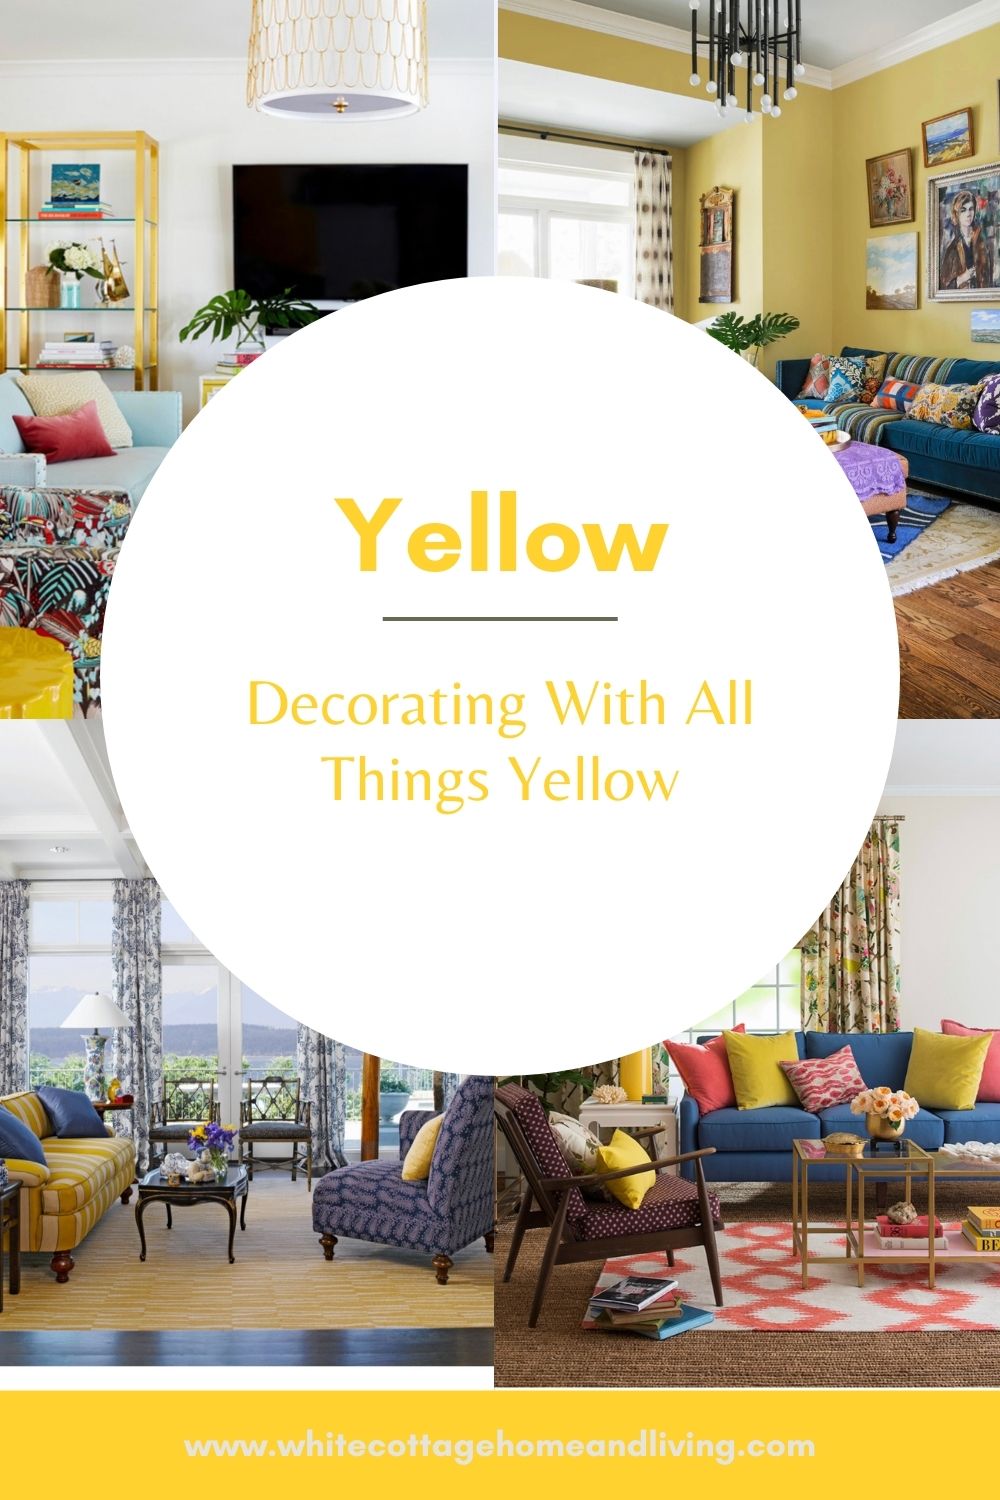 Decorating with All Things Yellow~ White Cottage Home & Living